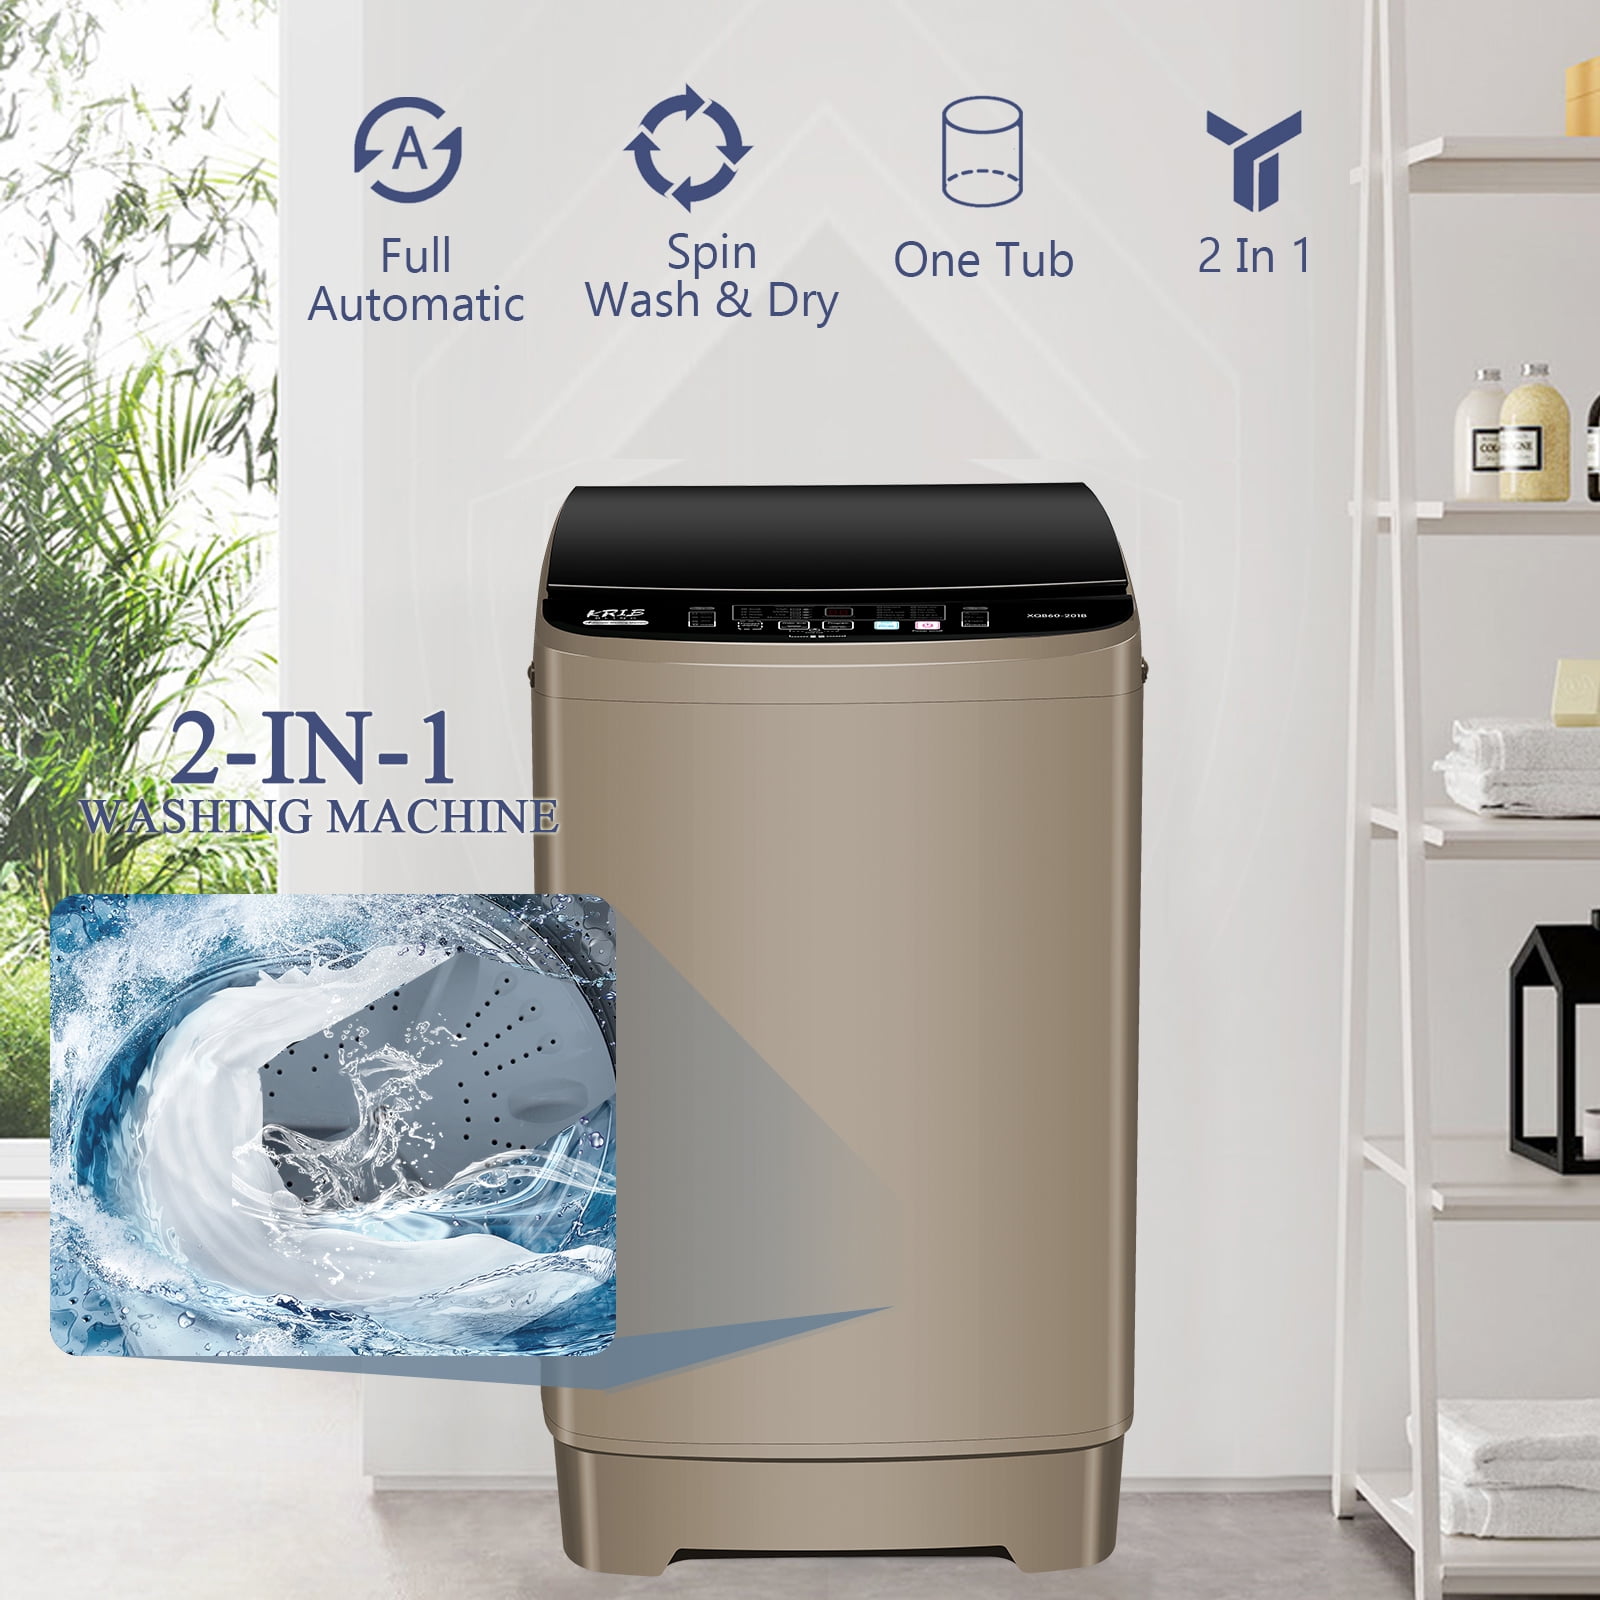 Dropship Full-Automatic Washing Machine With LED Display, 17.7 Lbs Portable  Compact Laundry Washer With Drain Pump, 10 Wash Programs 8 Water Levels,  Grey/Gold to Sell Online at a Lower Price